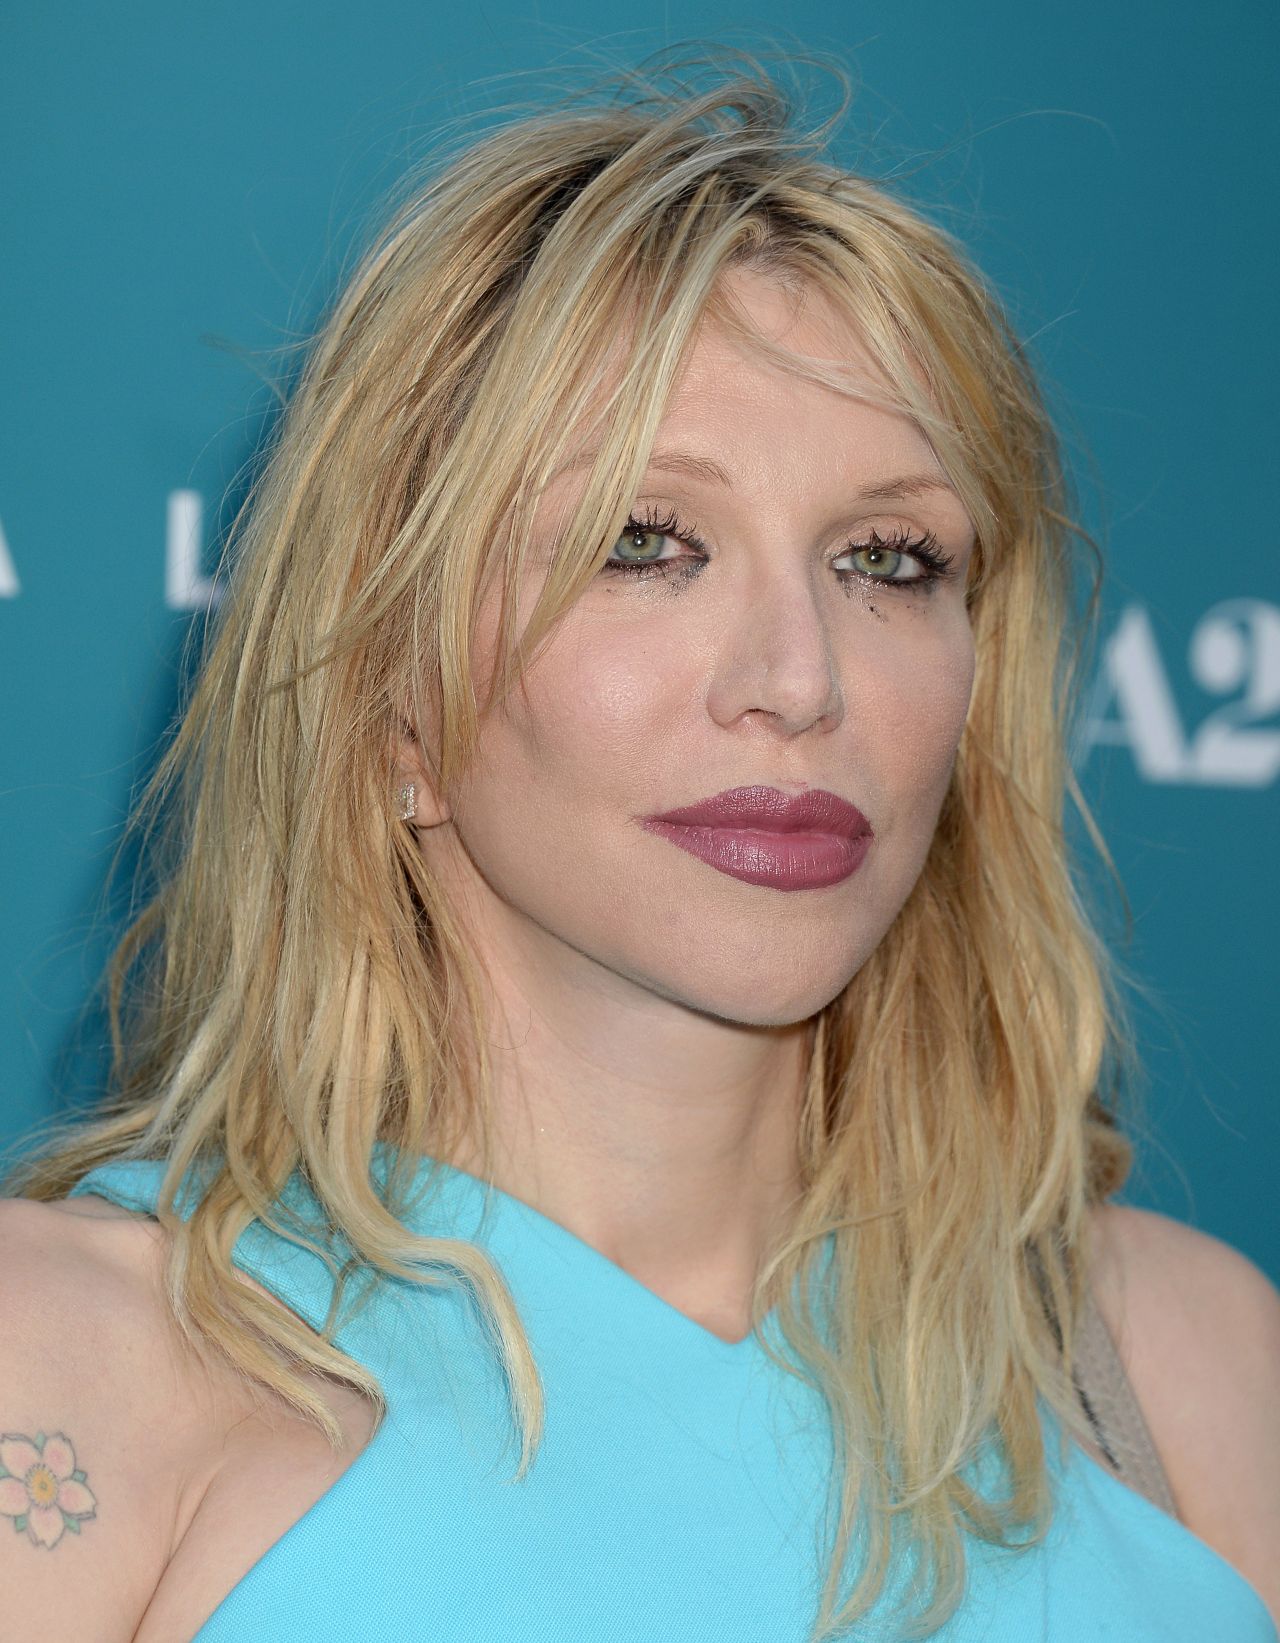 Courtney Love A24's 'Equals' Premiere at ArcLight Hollywood • CelebMafia